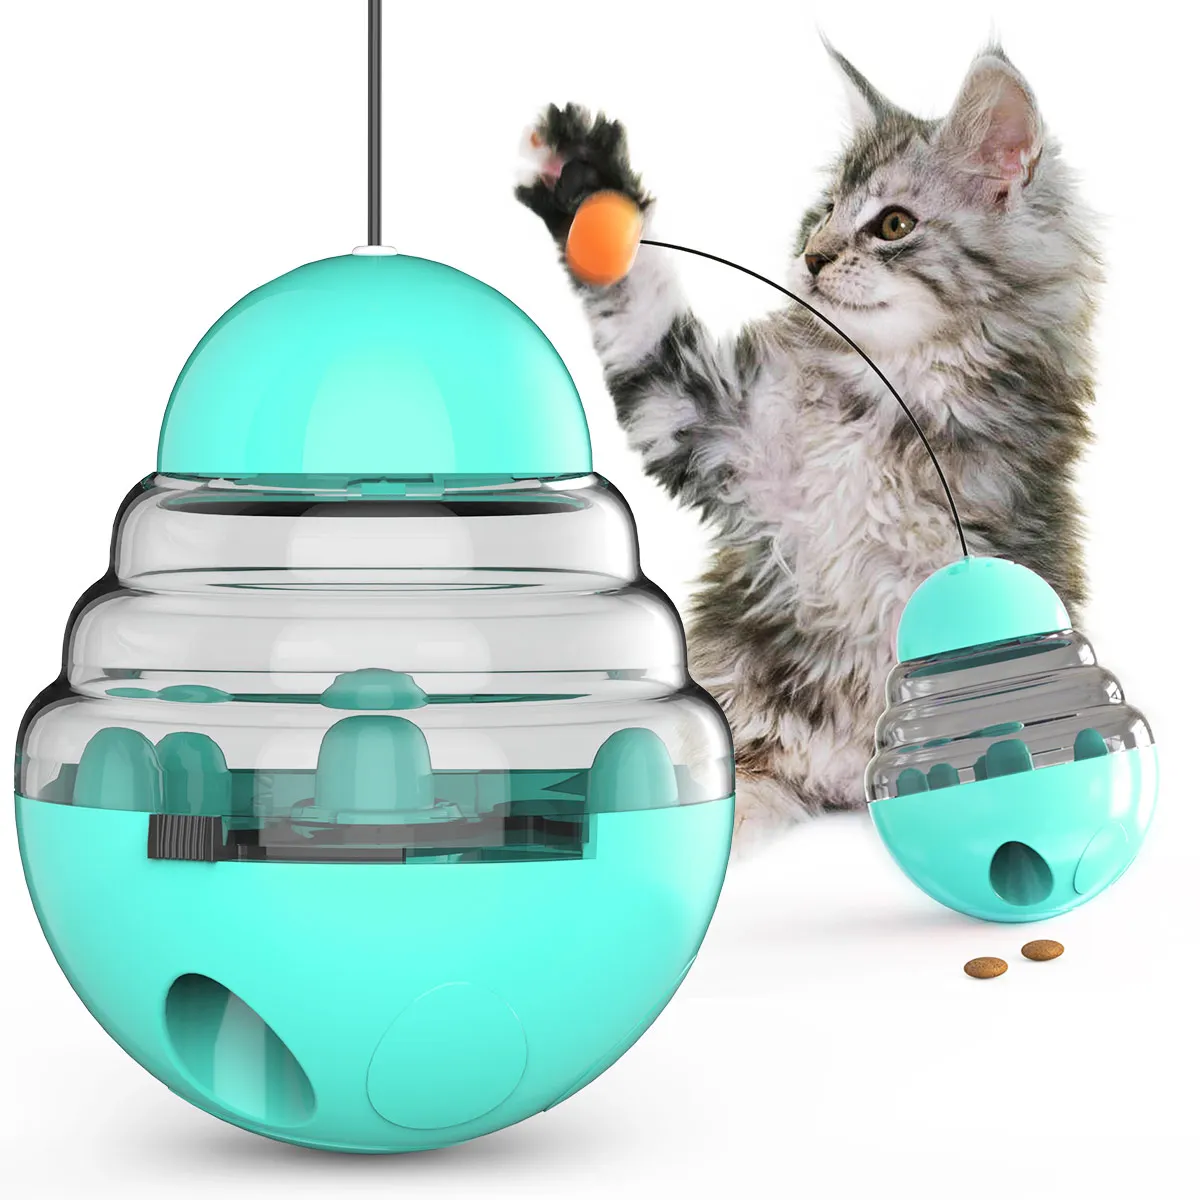 

Amazon Hot Sale Funny Cat Interactive Motion Toy Ball Cat Food Slow Leaking Feeders Tumbler Swing Toys, Picture showed